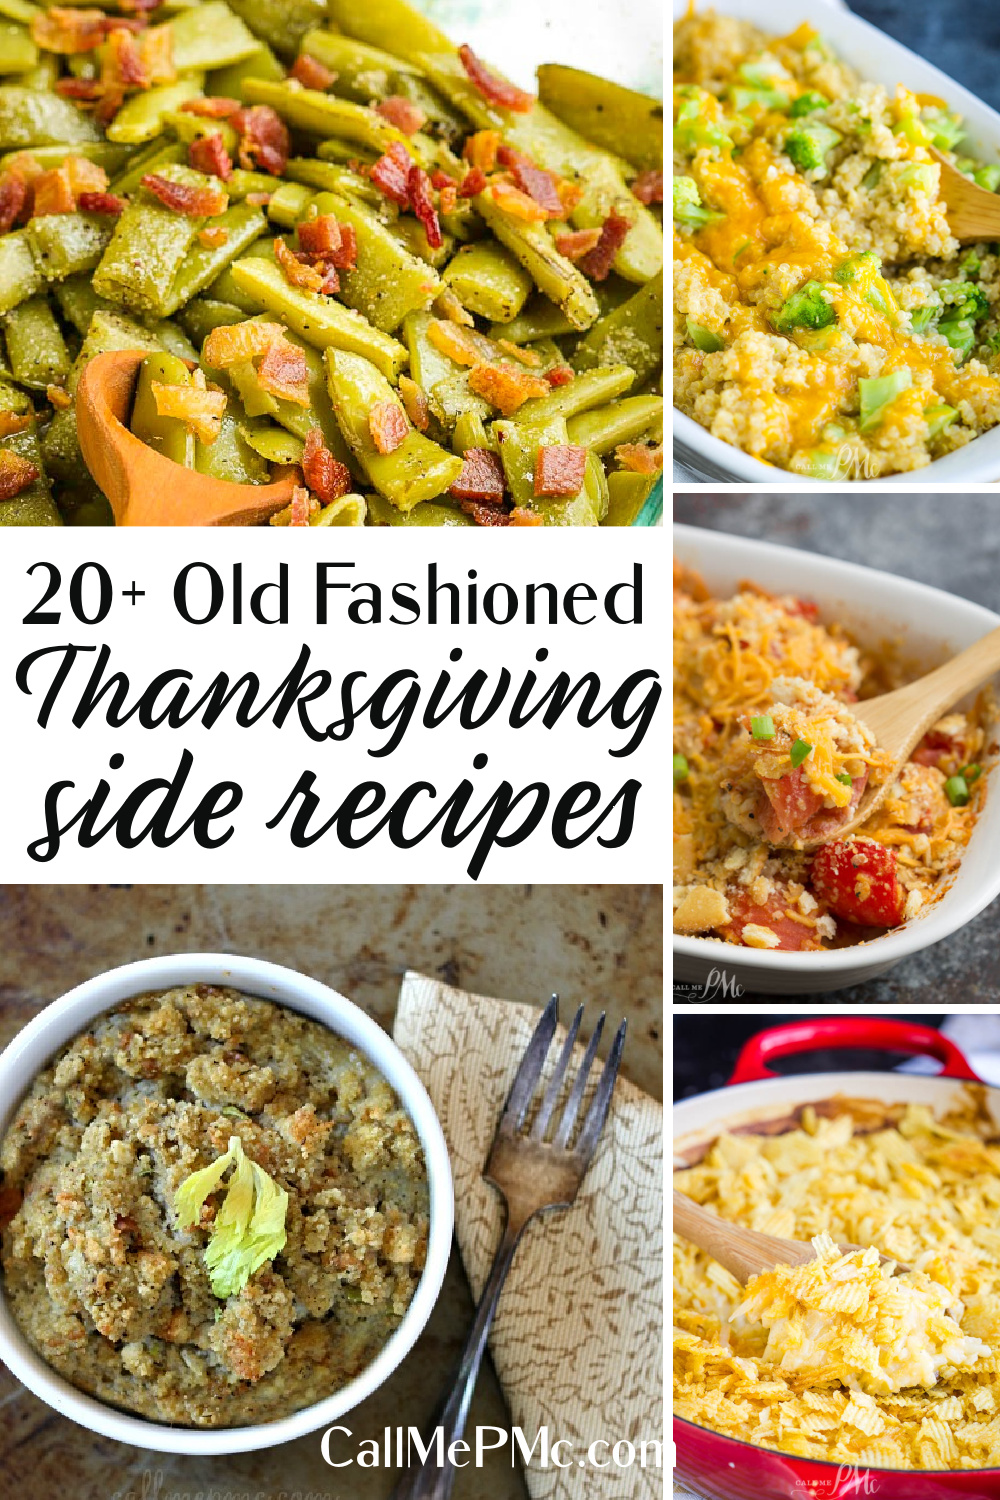 For Thanksgiving, I like good Old Fashioned Thanksgiving Side Dishes. The classics. Maybe you do too and it's your first year to host Thanksgiving dinner.